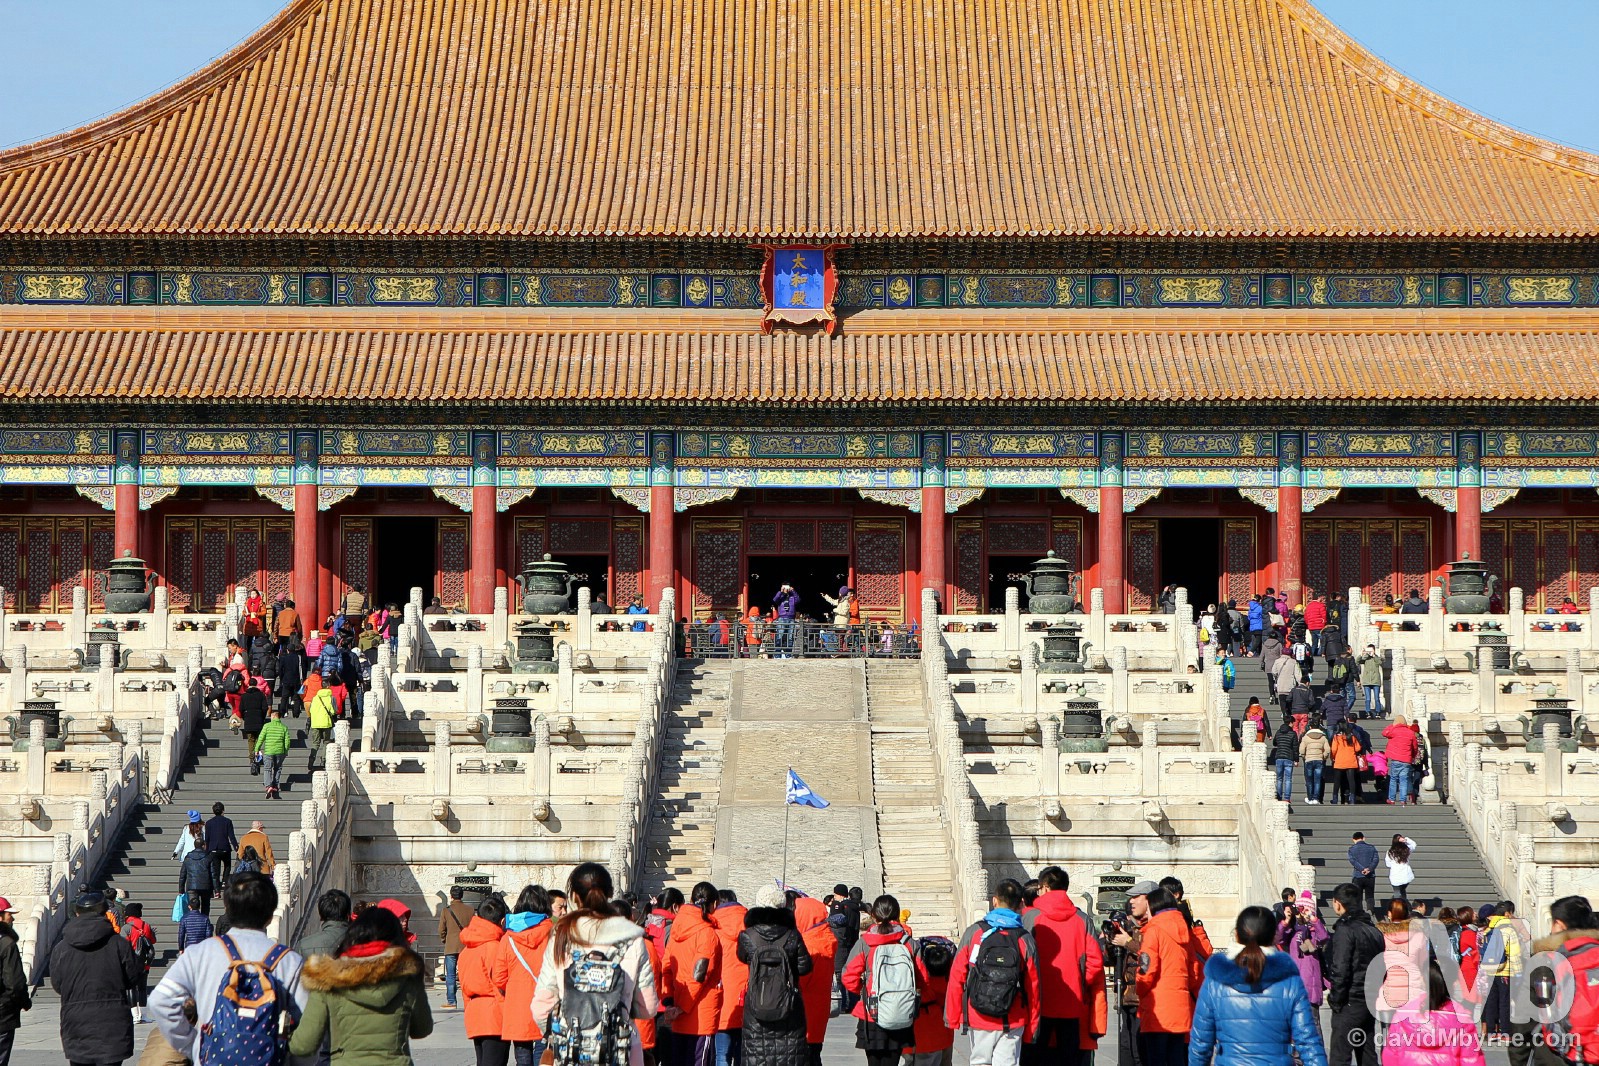 Tai He Dian (Hall of Supreme Harmony) in the Place Museum, a.k.a. The Forbidden City, the first & main hall of the three major halls of the outer court of the Forbidden City, in Beijing, China. February 4, 2015.